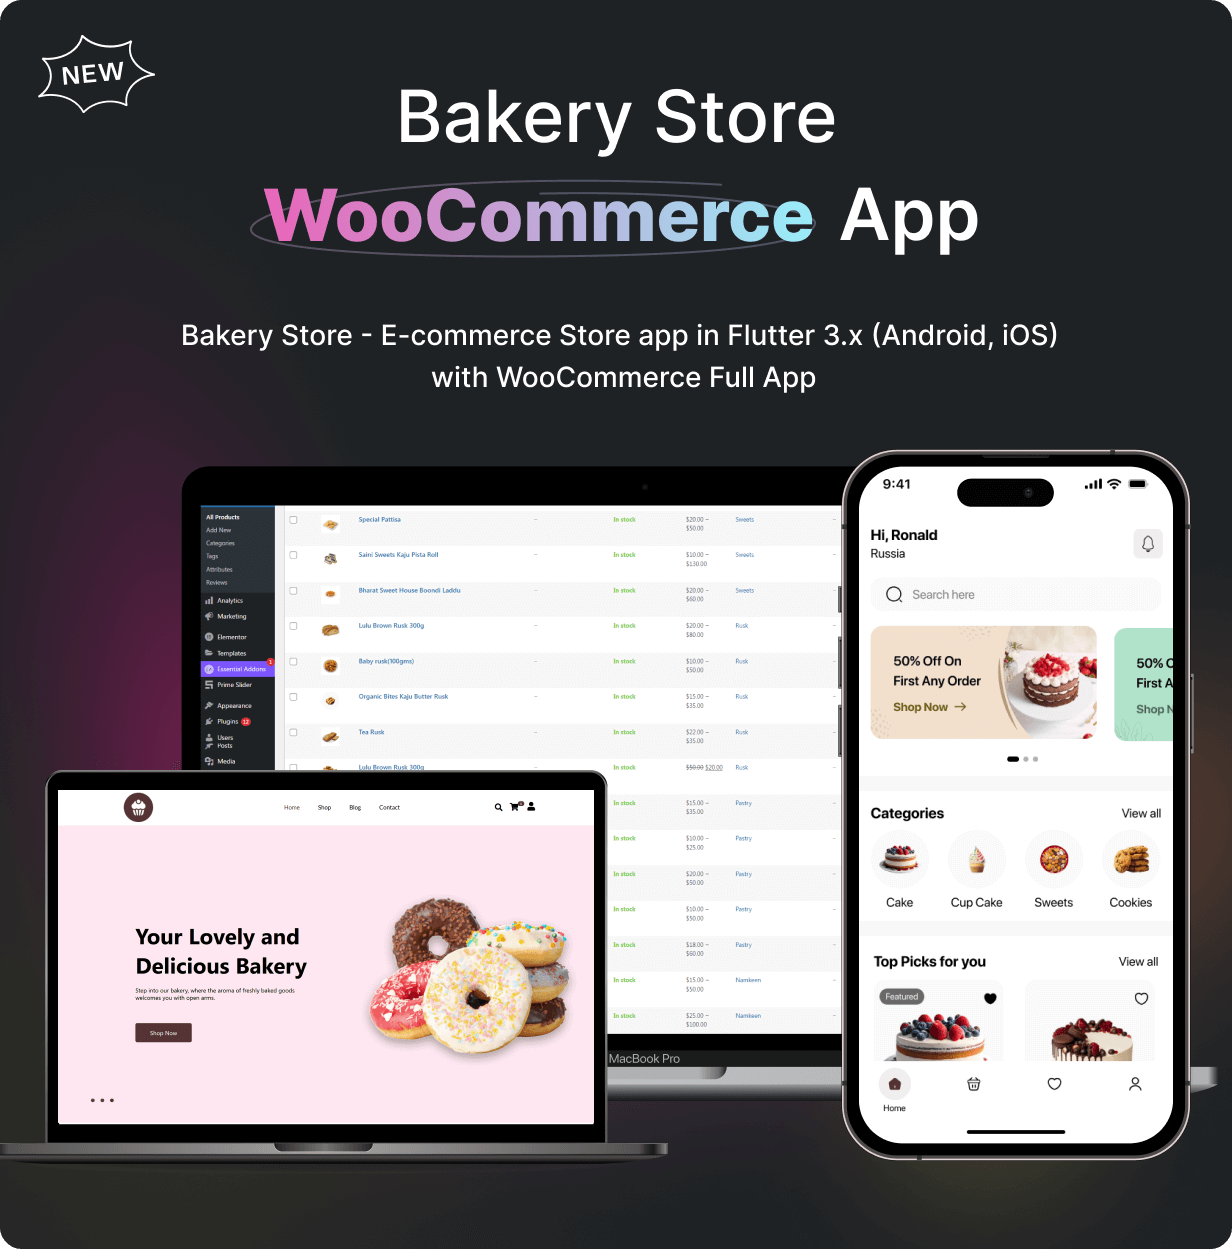 Bakery Shop App - E-commerce Store app in Flutter 3.x (Android, iOS) with WooCommerce Full App - 7